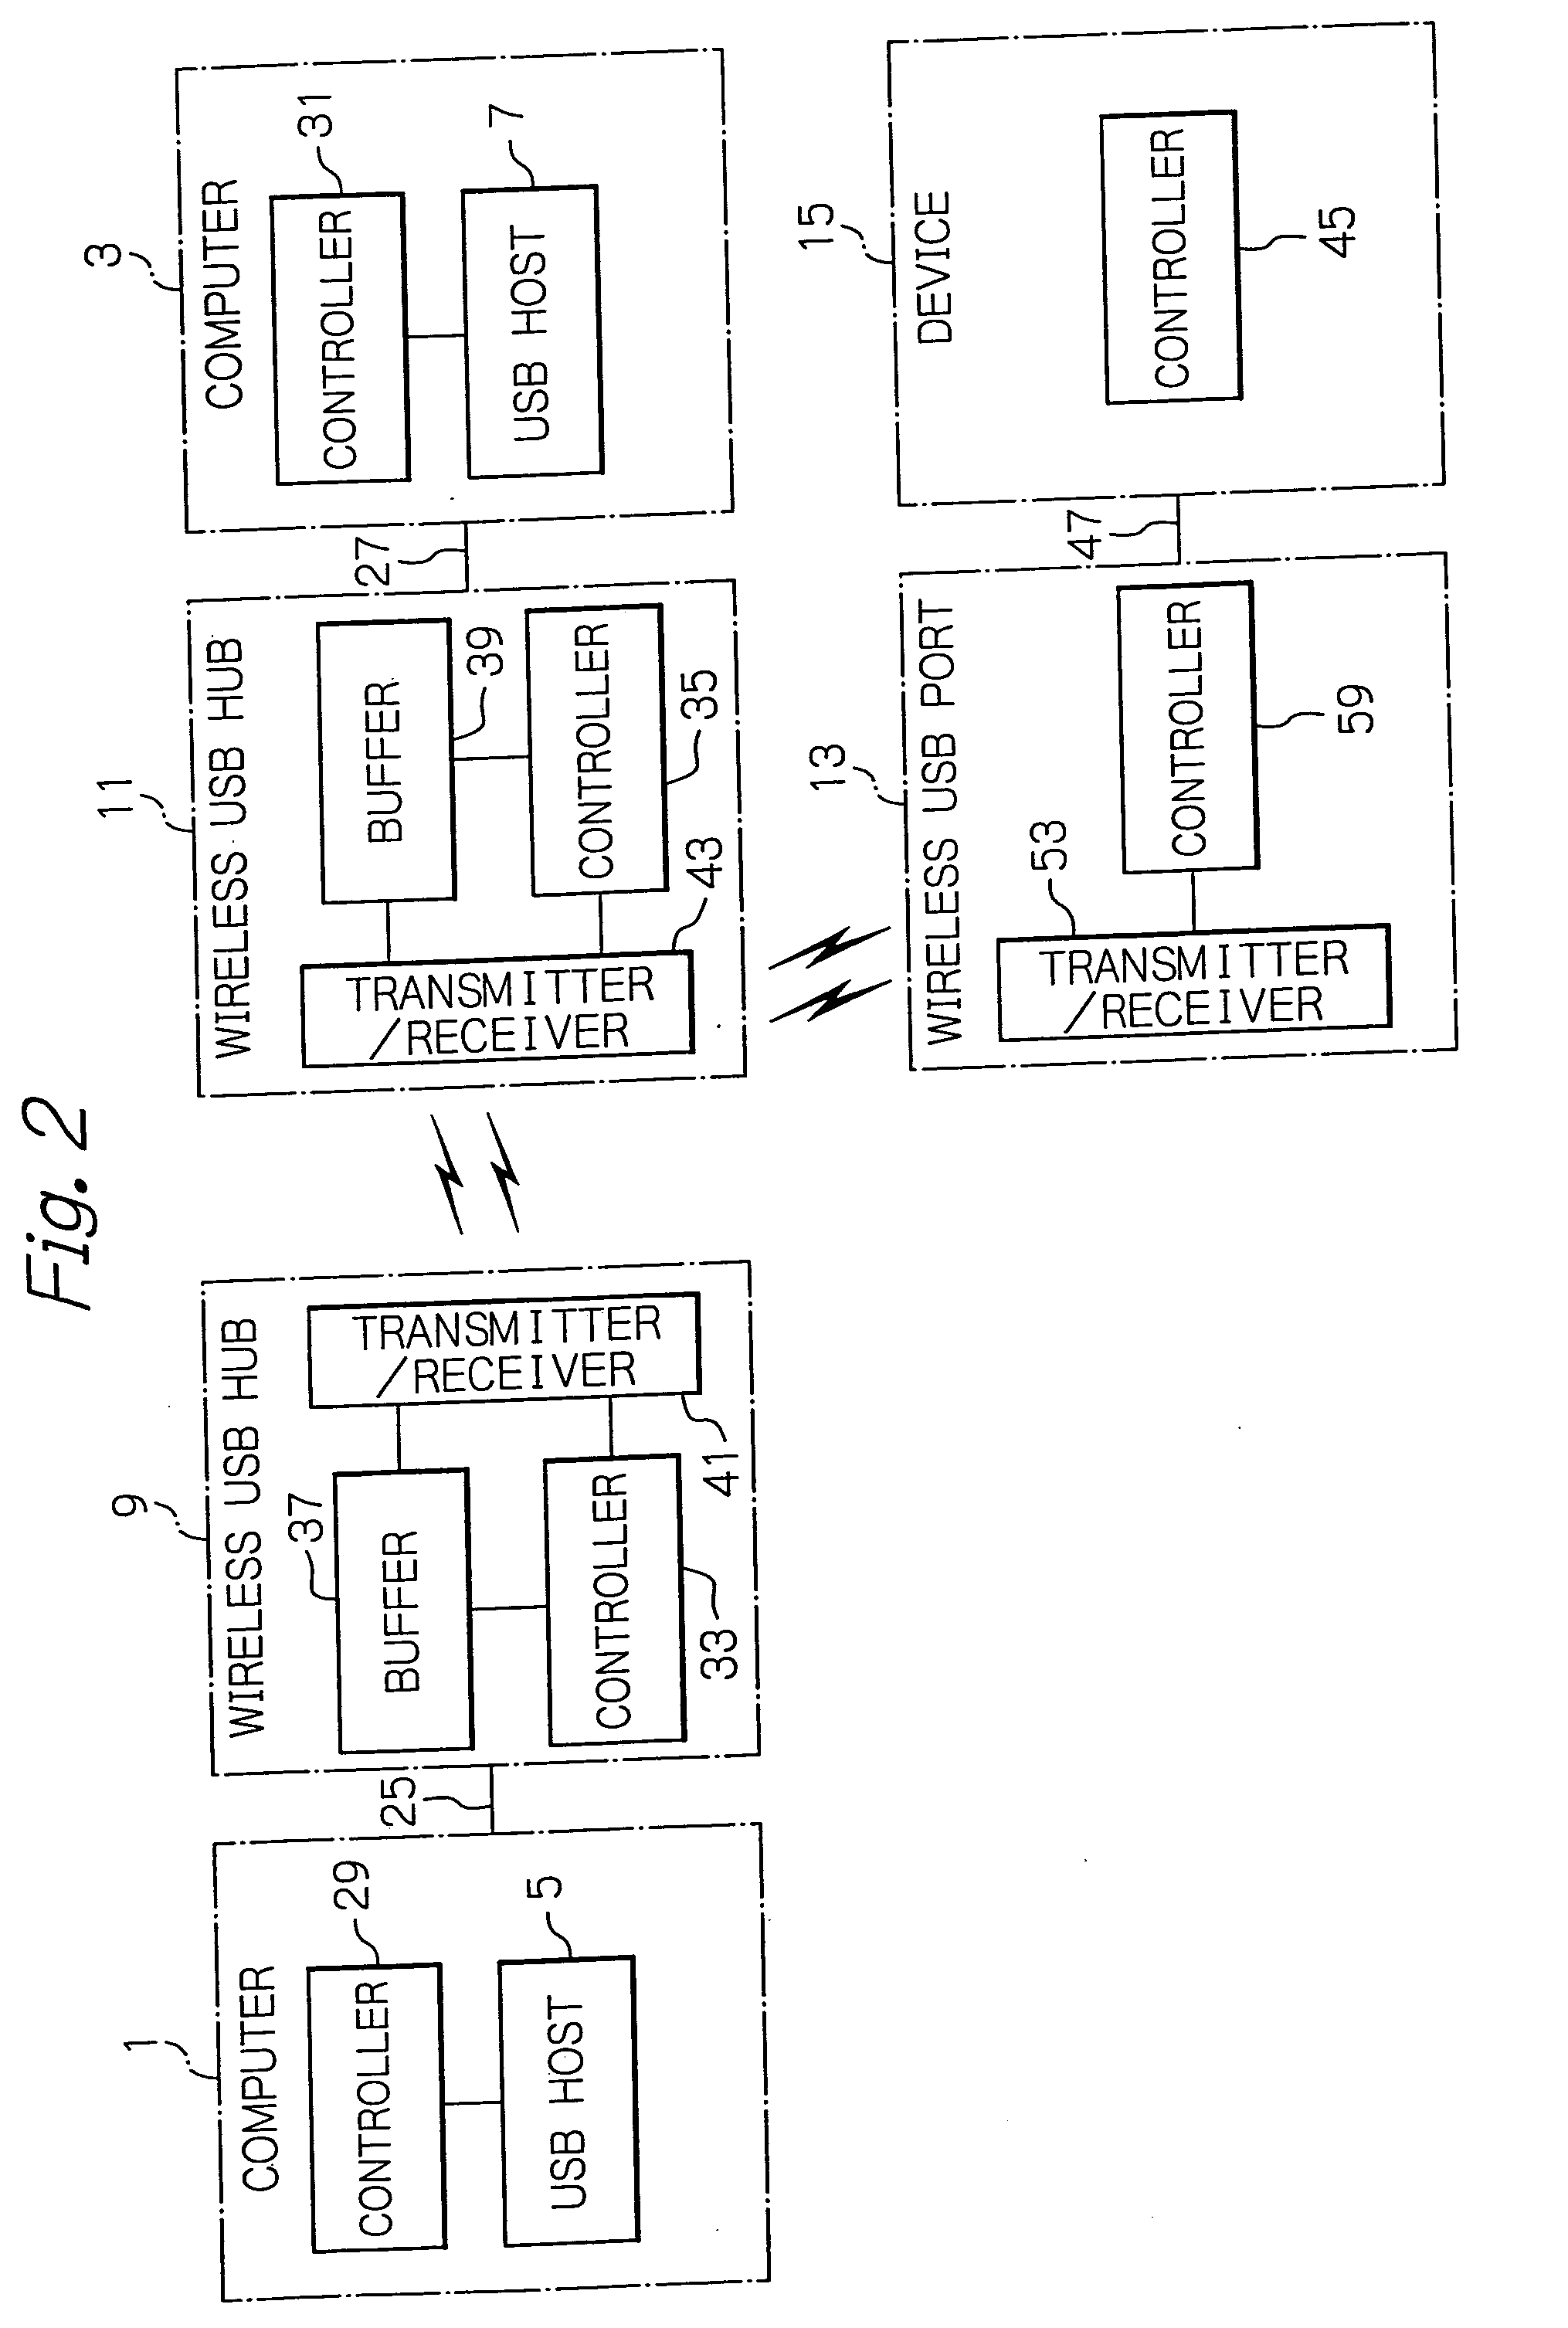 Method and a system for establishing a connection with identification and group information